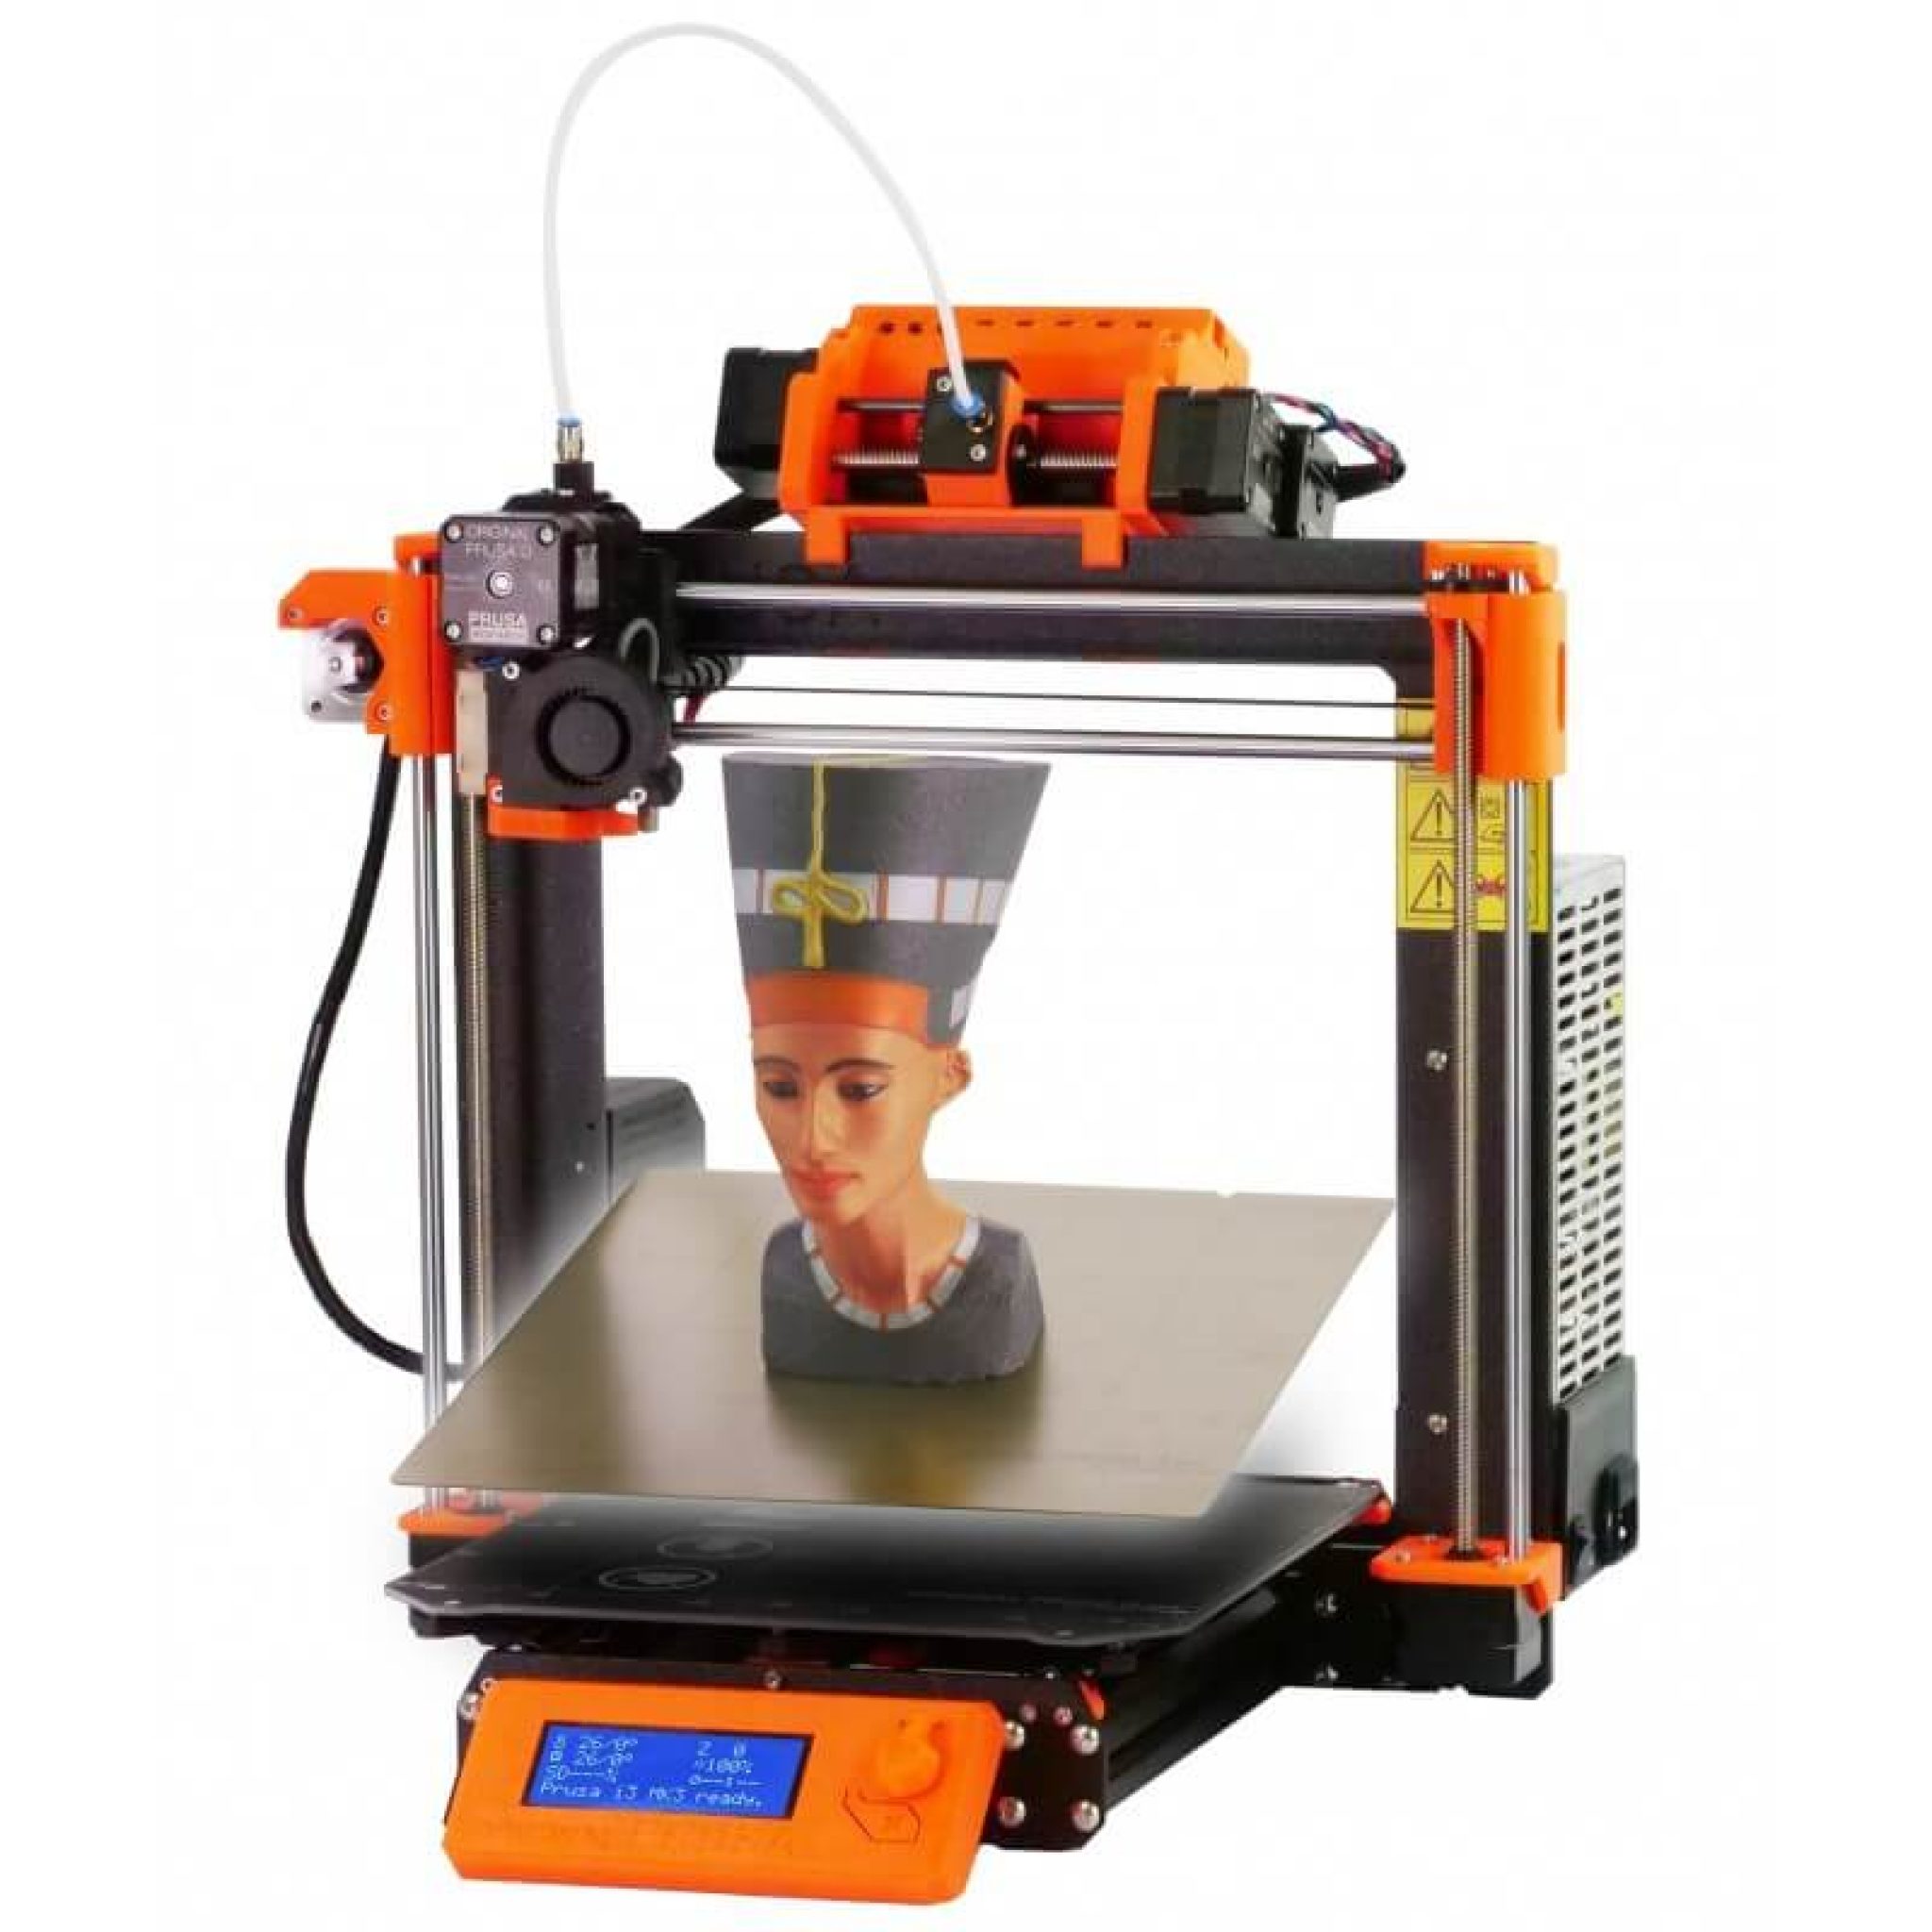 2021 Best 3D Printer Plastic- Types, Uses And Buying Guide - Original Prusa I3 MK3S 1 2048x2048